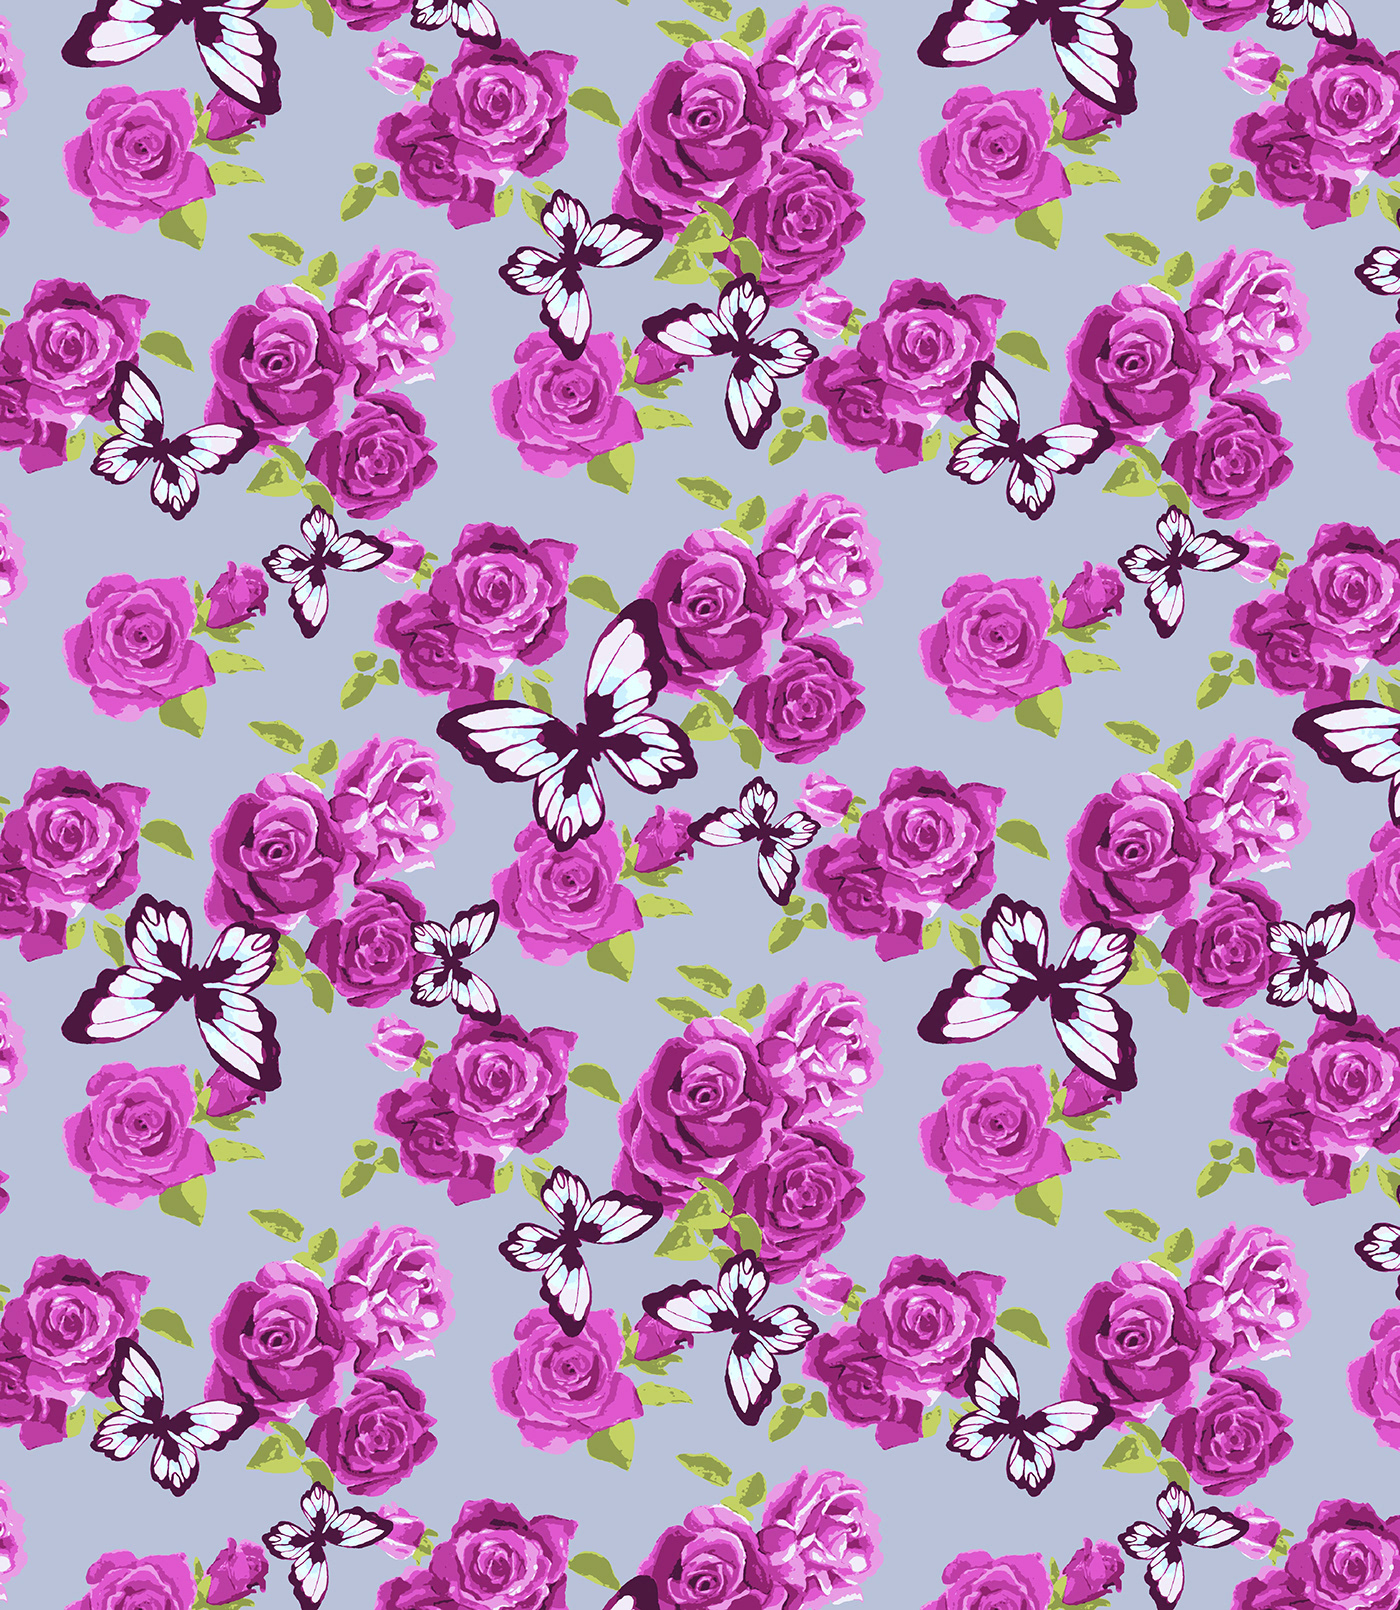 floral butterfly romantic colorway bright rose traditional digital Flowers textile